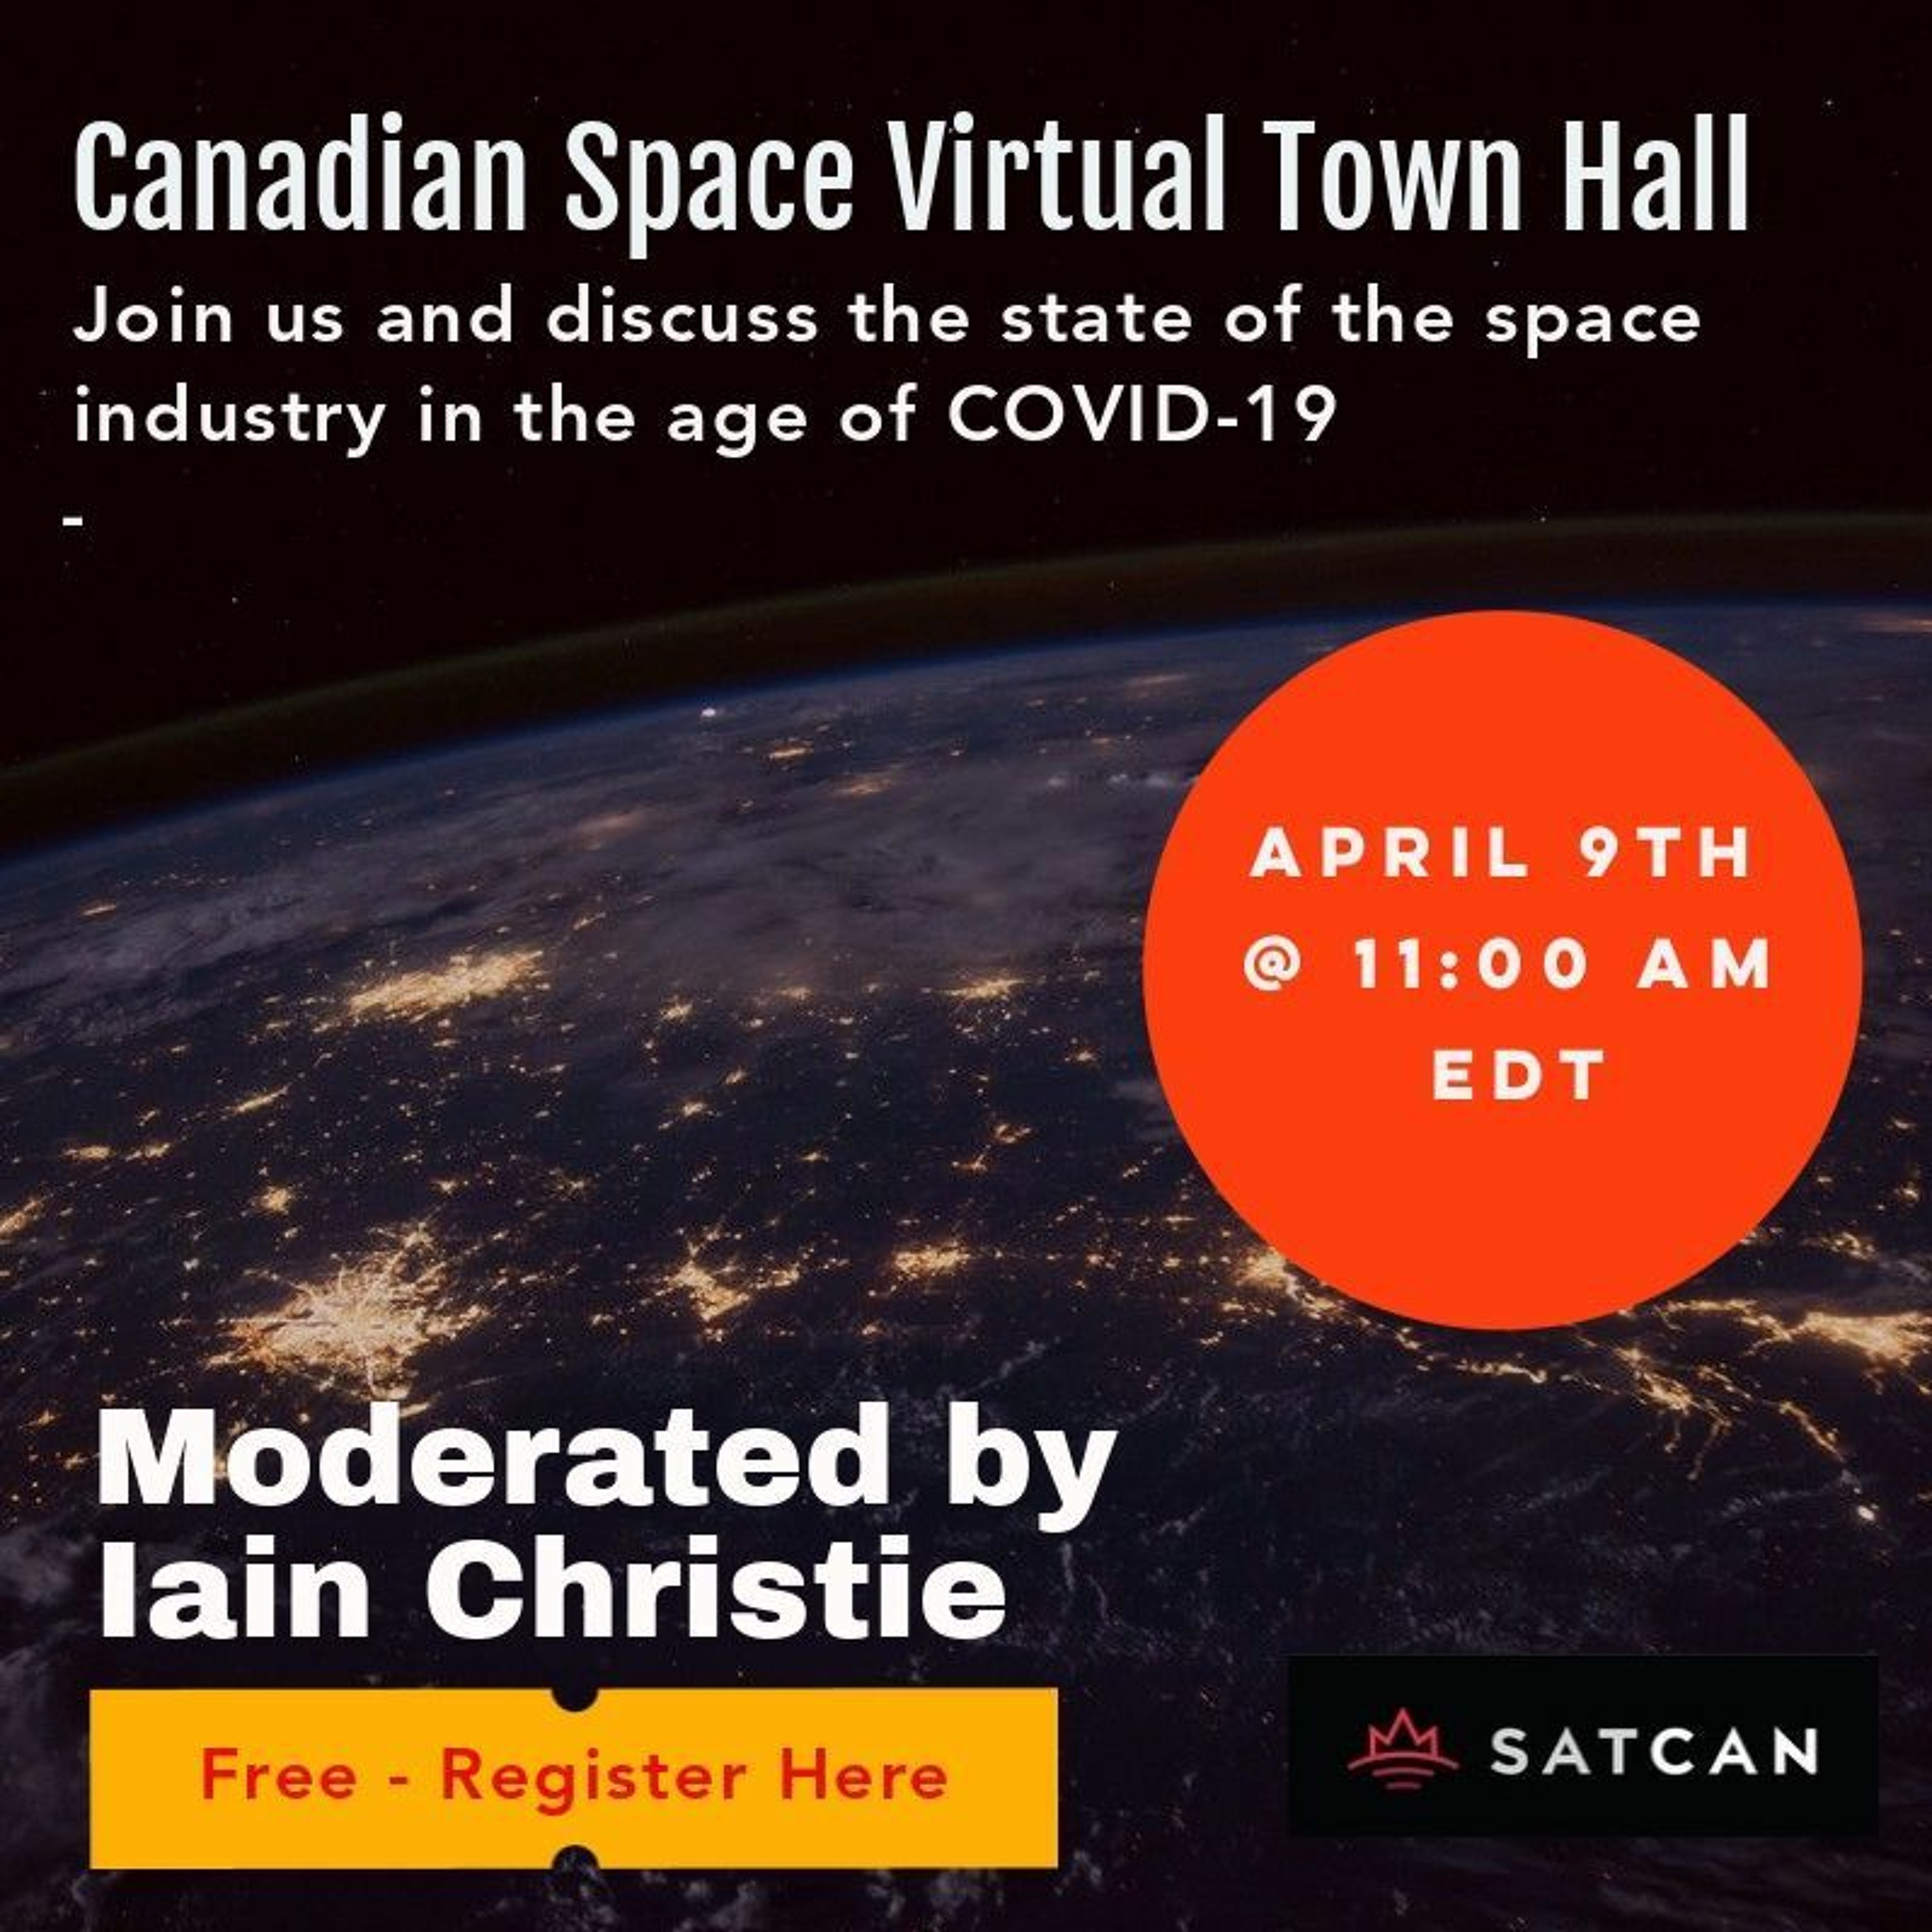 Special Message - Upcoming Canadian Space Virtual Town Hall